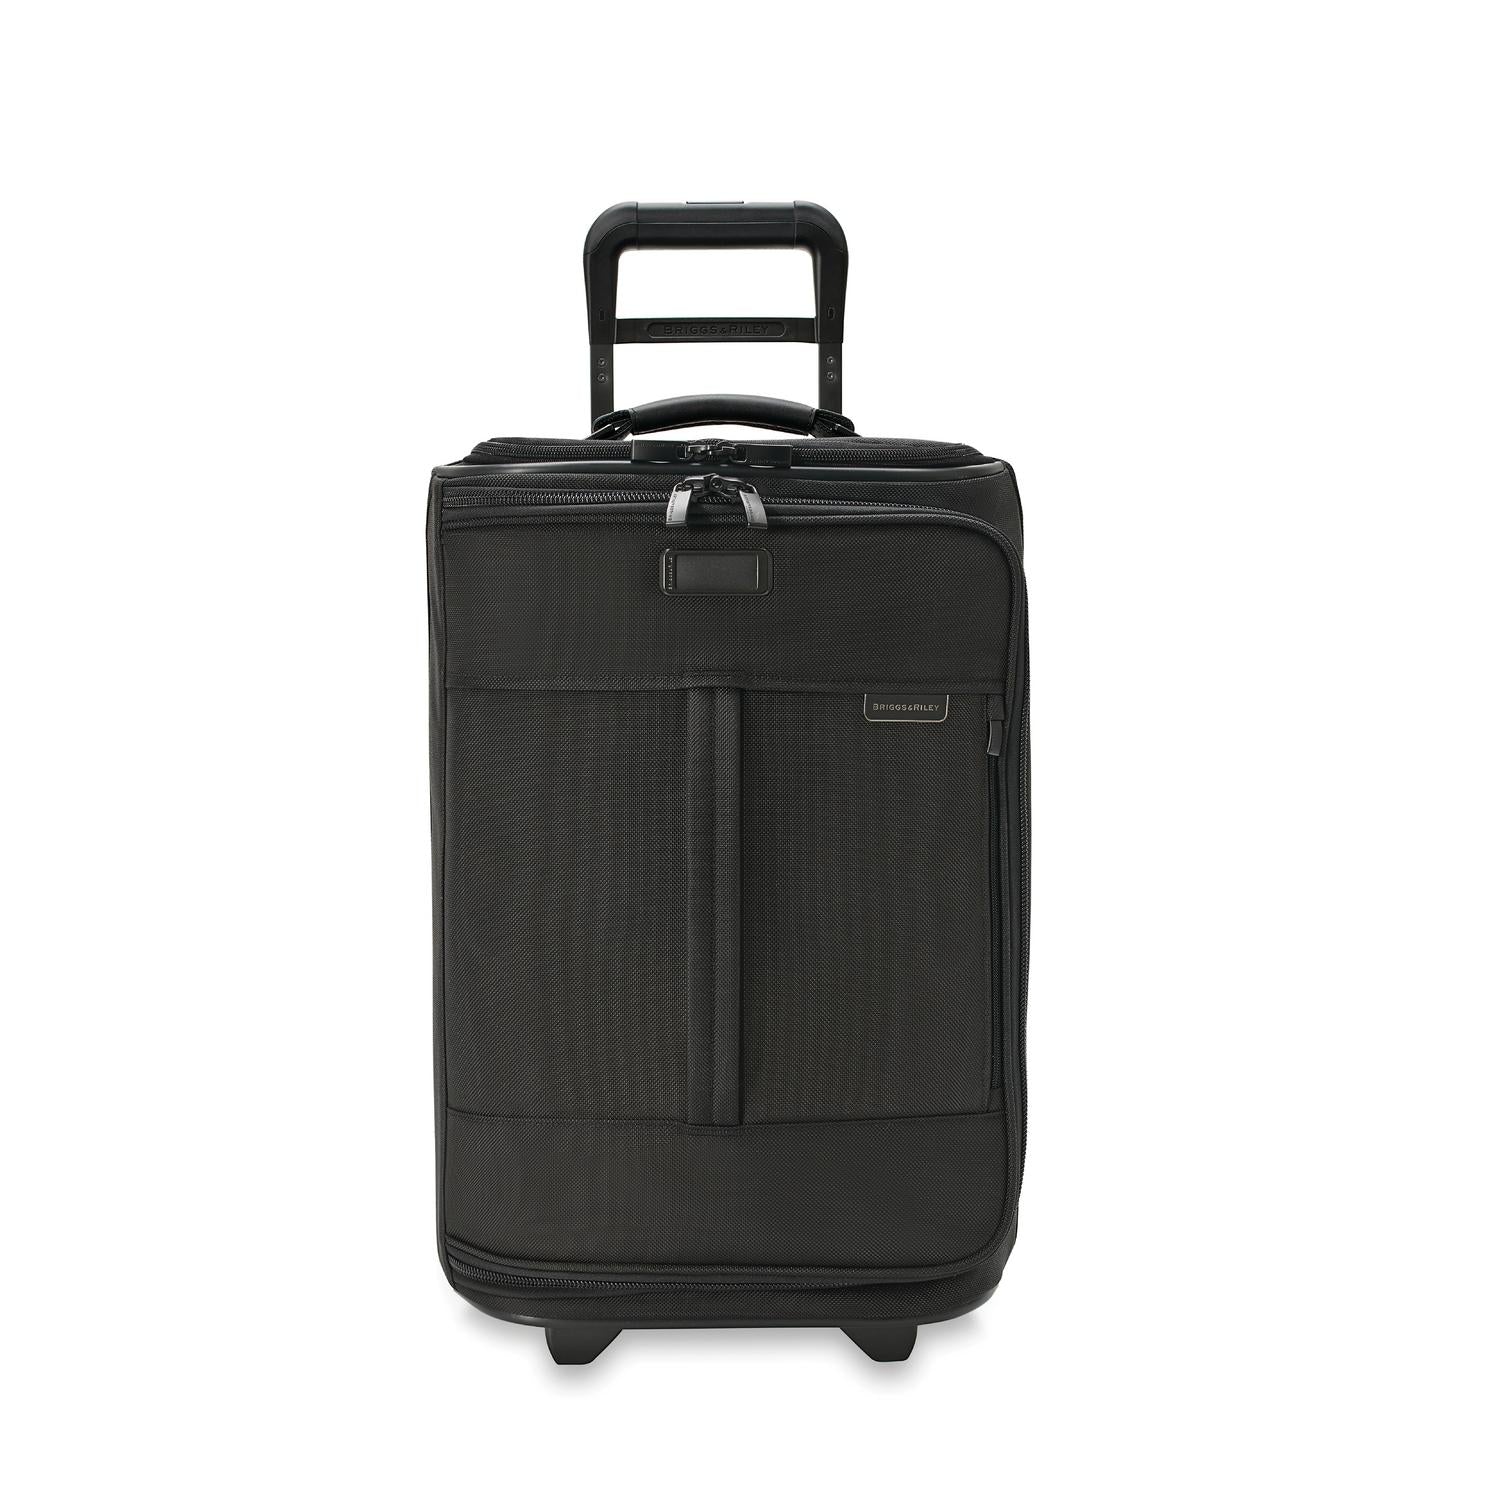 Airport Travel Design Carry-on Luggage 18.5